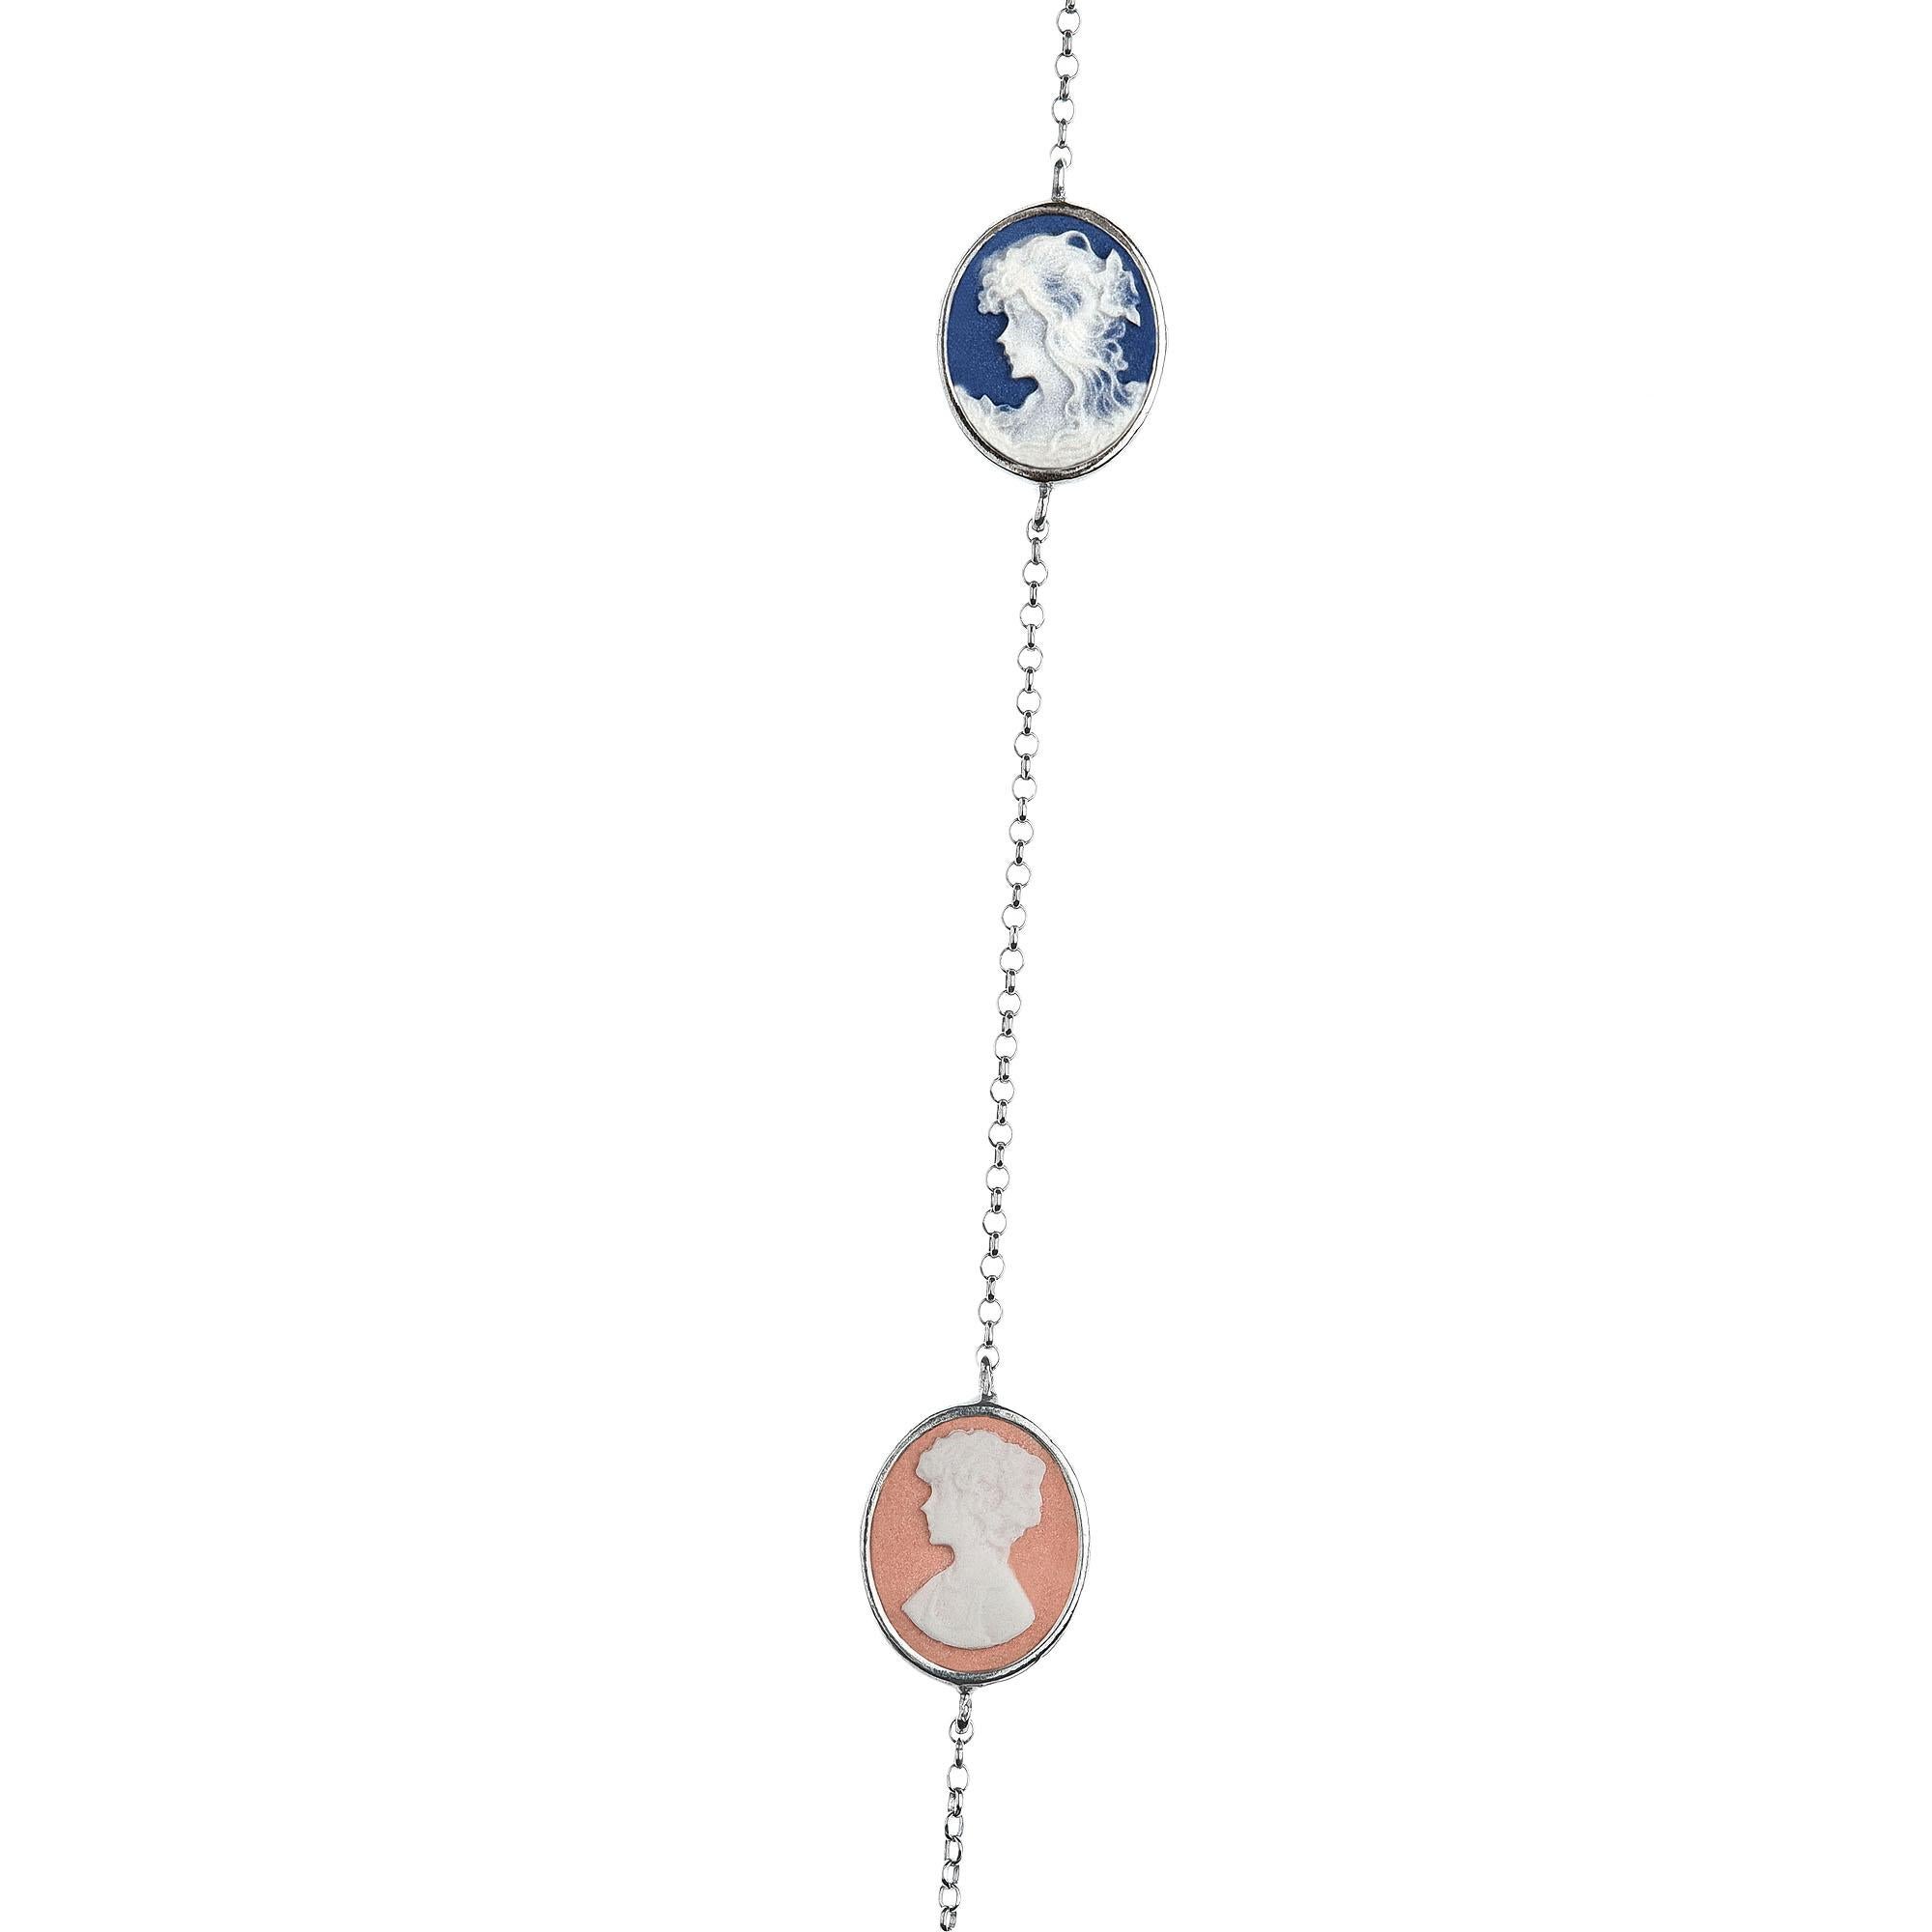 Rhodium Plated Sterling Silver and Fine Porcelain
Handmade in Italy


Rhodium Plated Sterling Silver and Fine Porcelain
Handmade in Italy

Beyond collection design to go further than the classic interpretations of the Cameo. With the freedom of